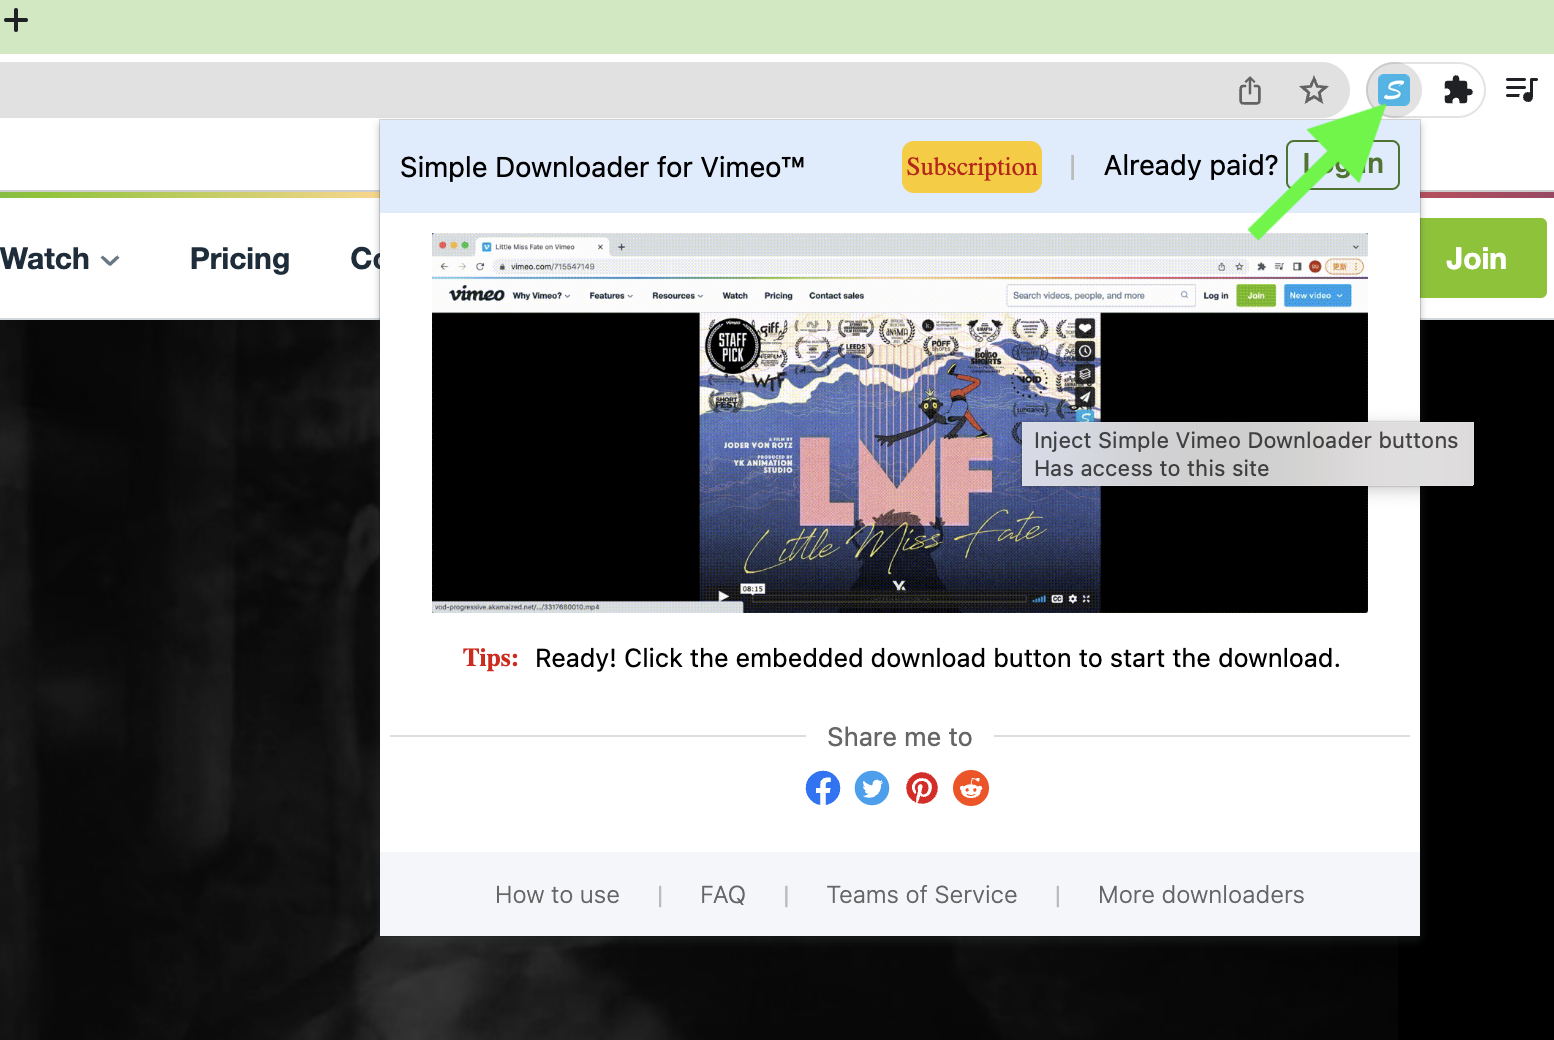 Click on the Simple Downloader for Vimeo™ icon in the Chrome toolbar